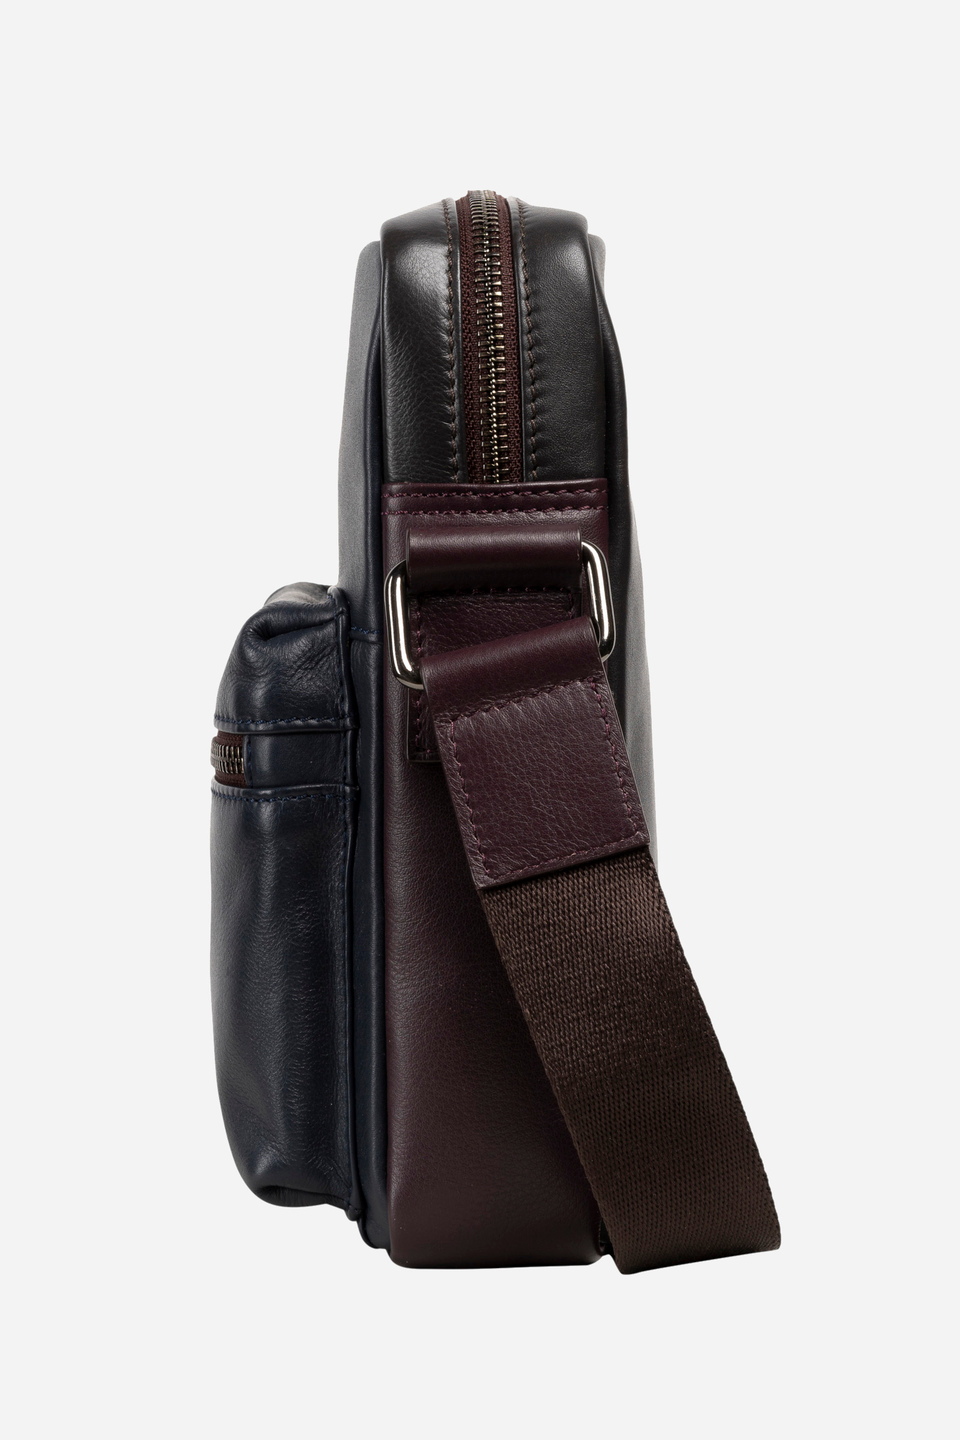 Leather crossbody bag with a polyester webbing strap | La Martina - Official Online Shop